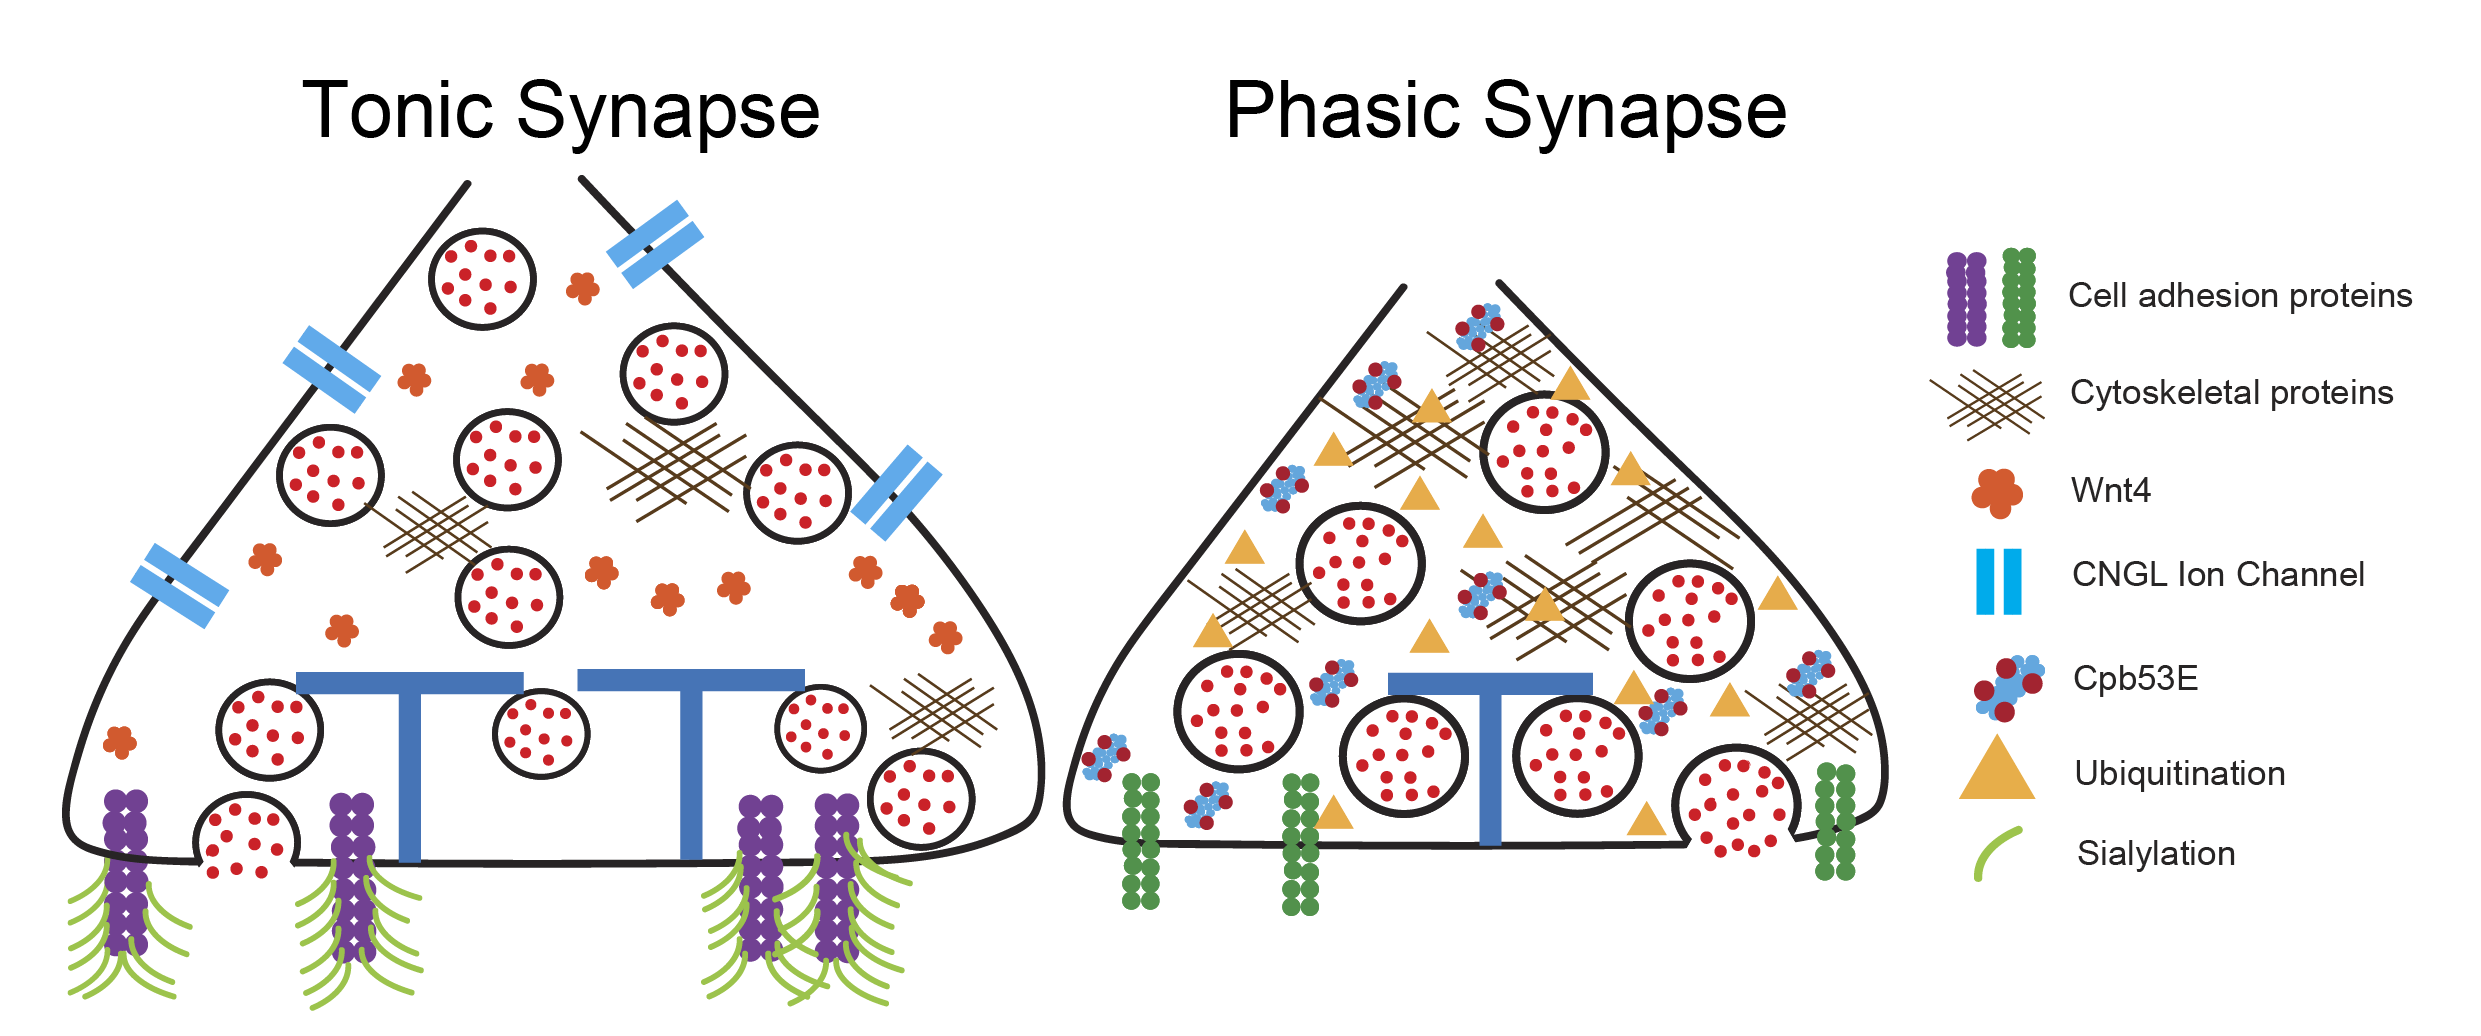 Schematics show differences between tonic and phasic synapses referenced earlier in the story such as ubiquitination and sialylation.